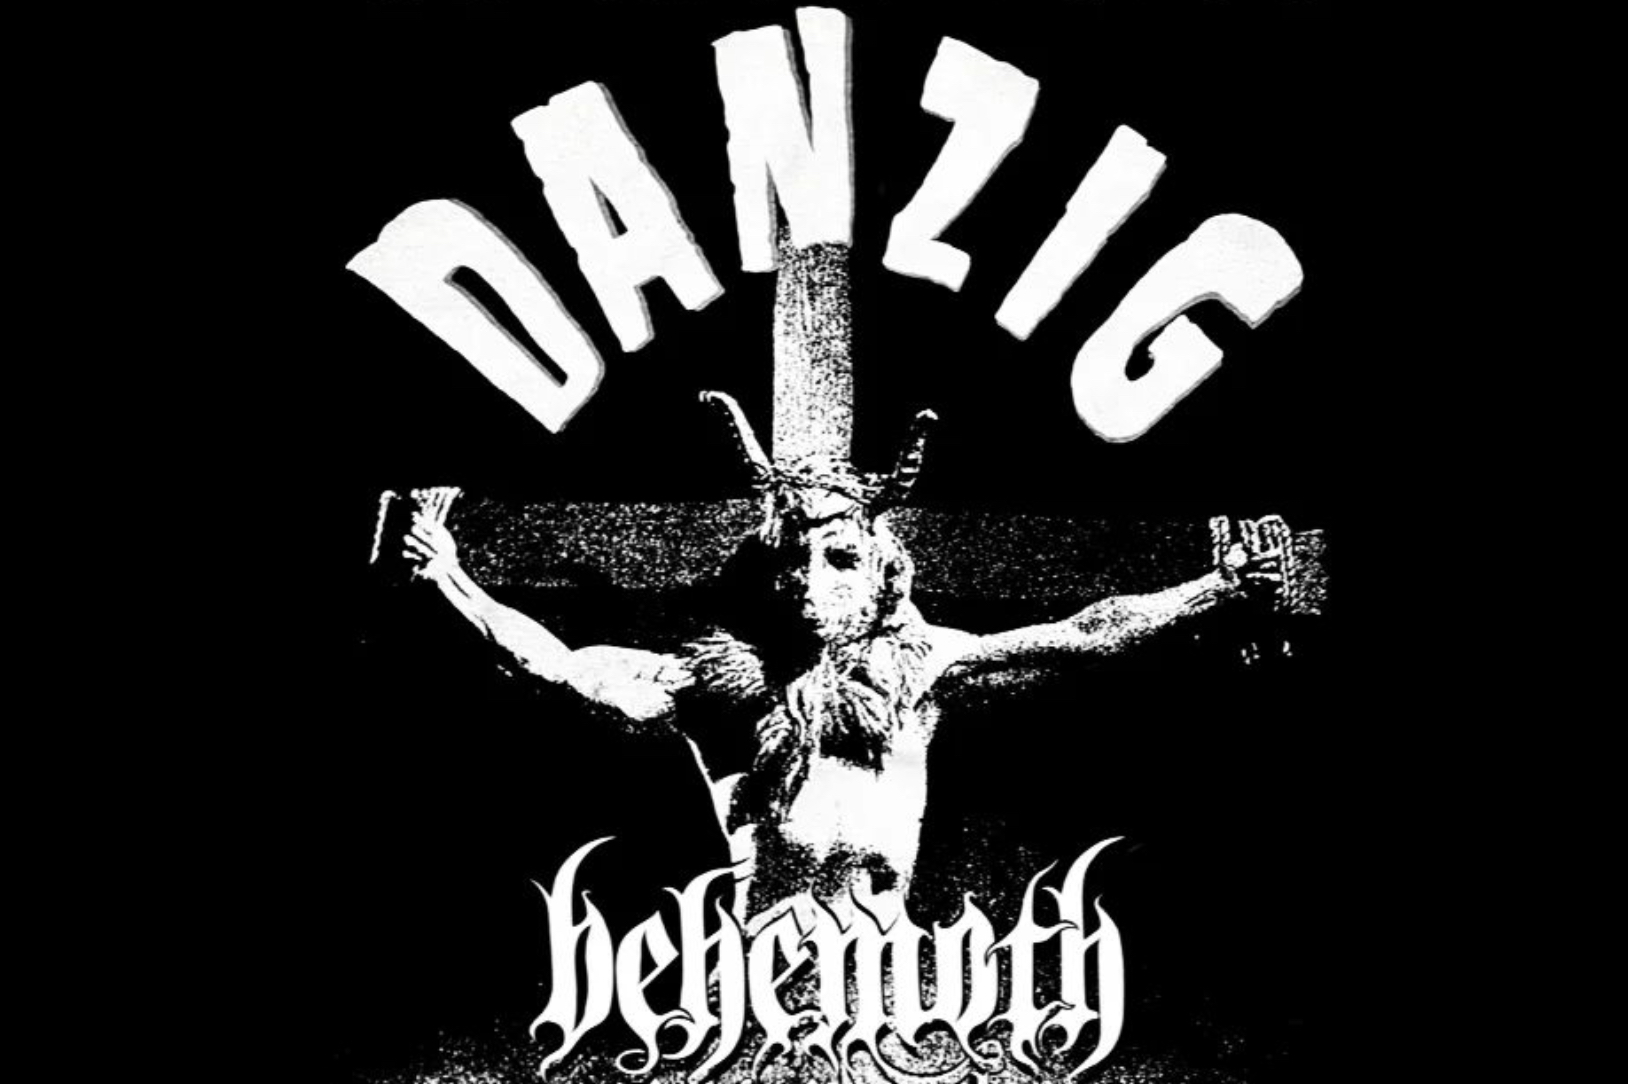 Danzig Announces 35th Anniversary Tour With Only 14 Dates And Ending In Chicago